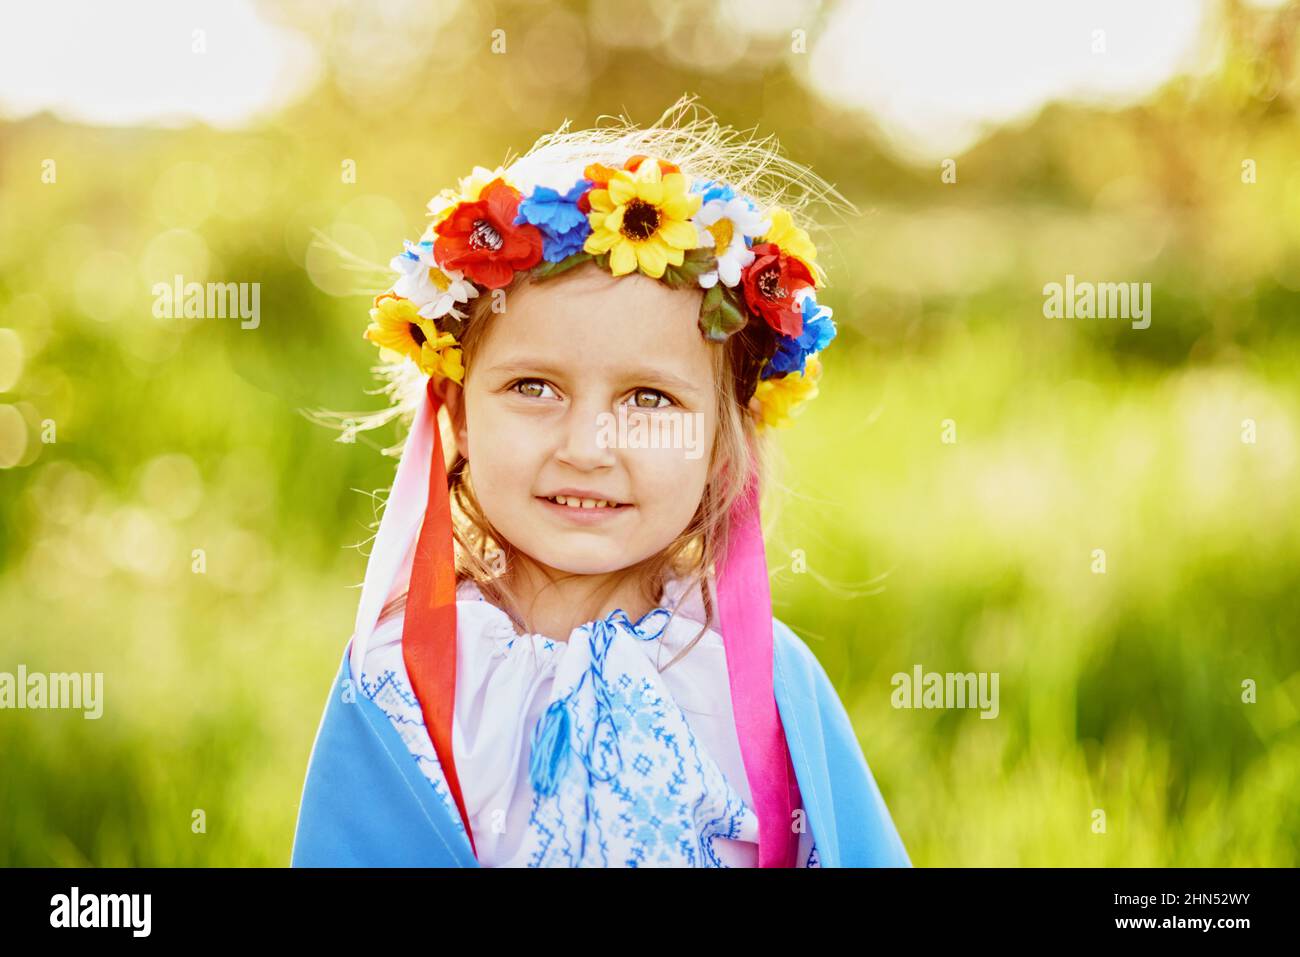 Ukraines Independence Flag Day. Constitution day. Ukrainian child girl in embroidered shirt vyshyvanka with yellow and blue flag of Ukraine in field. Stock Photo